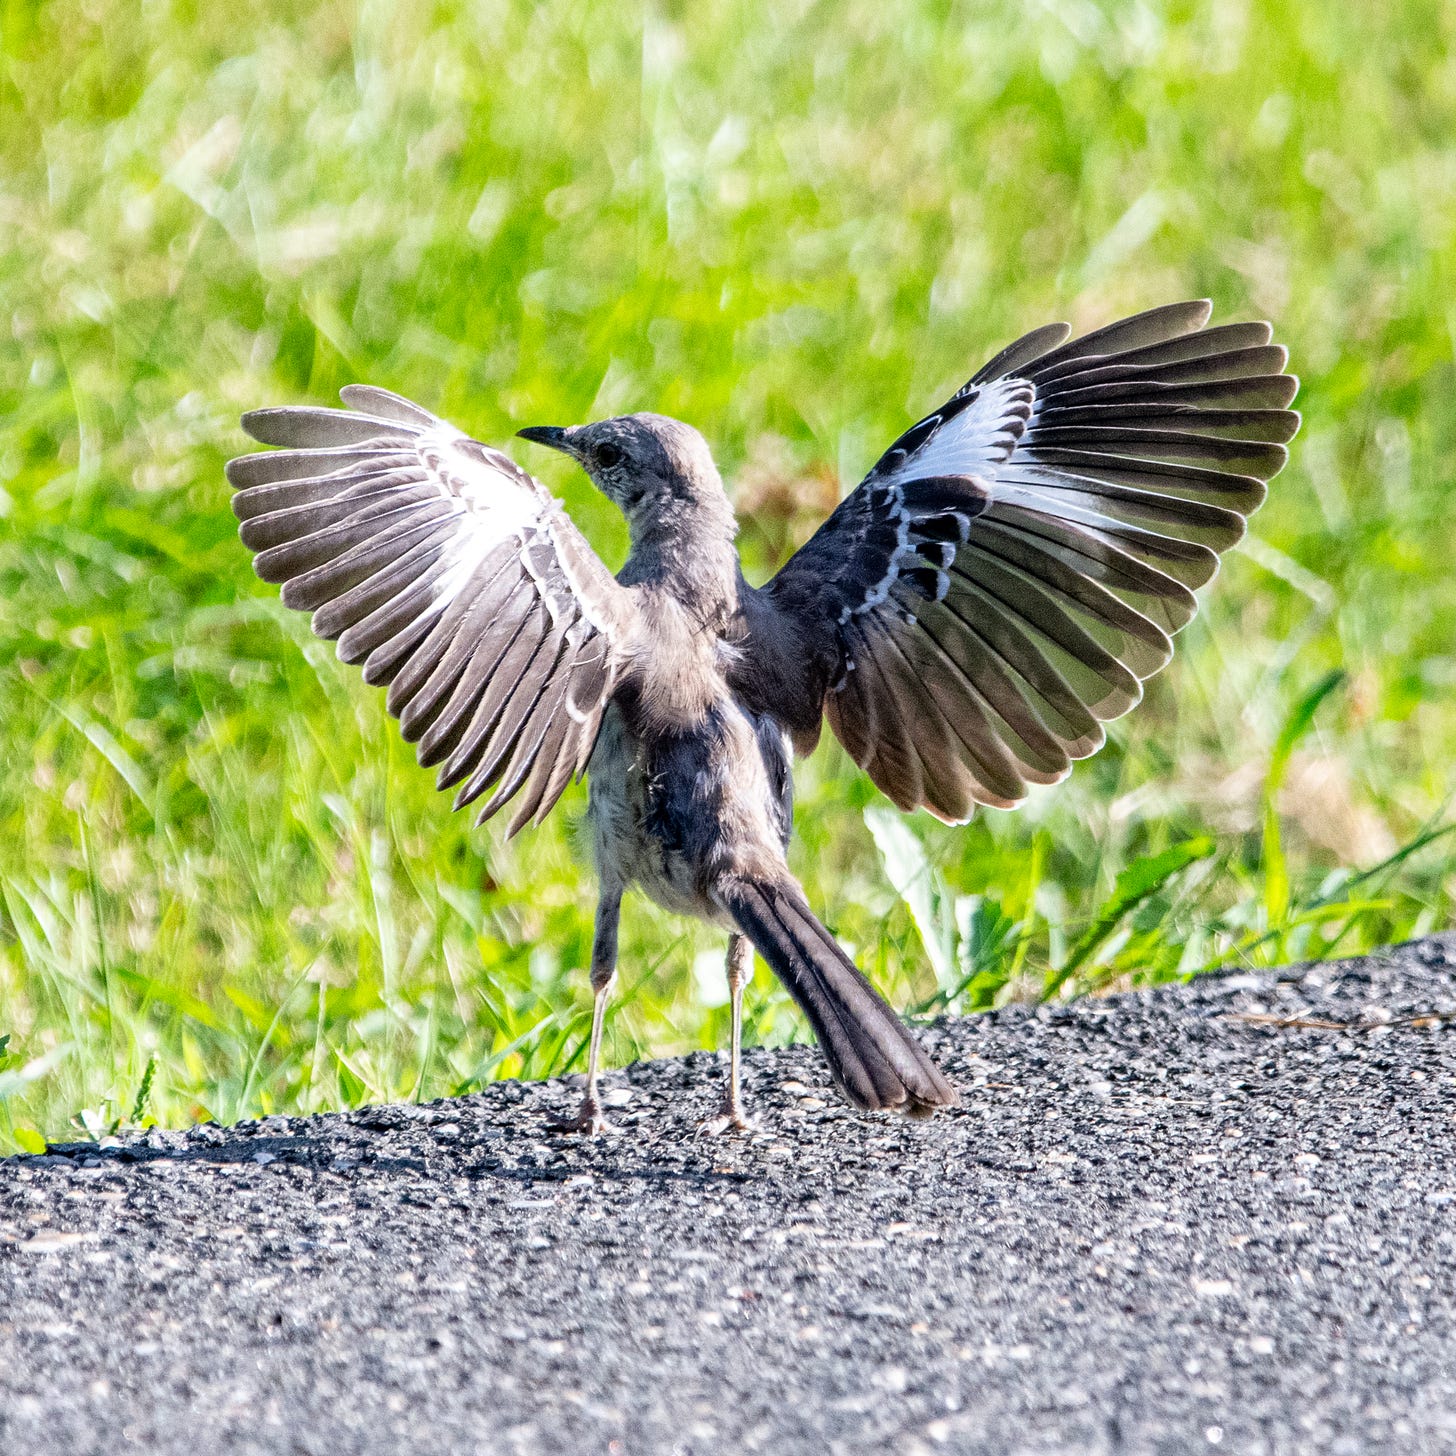 An American mockingbird, standing on a sidewalk, stretches out its wings in a 'flashing' gesture